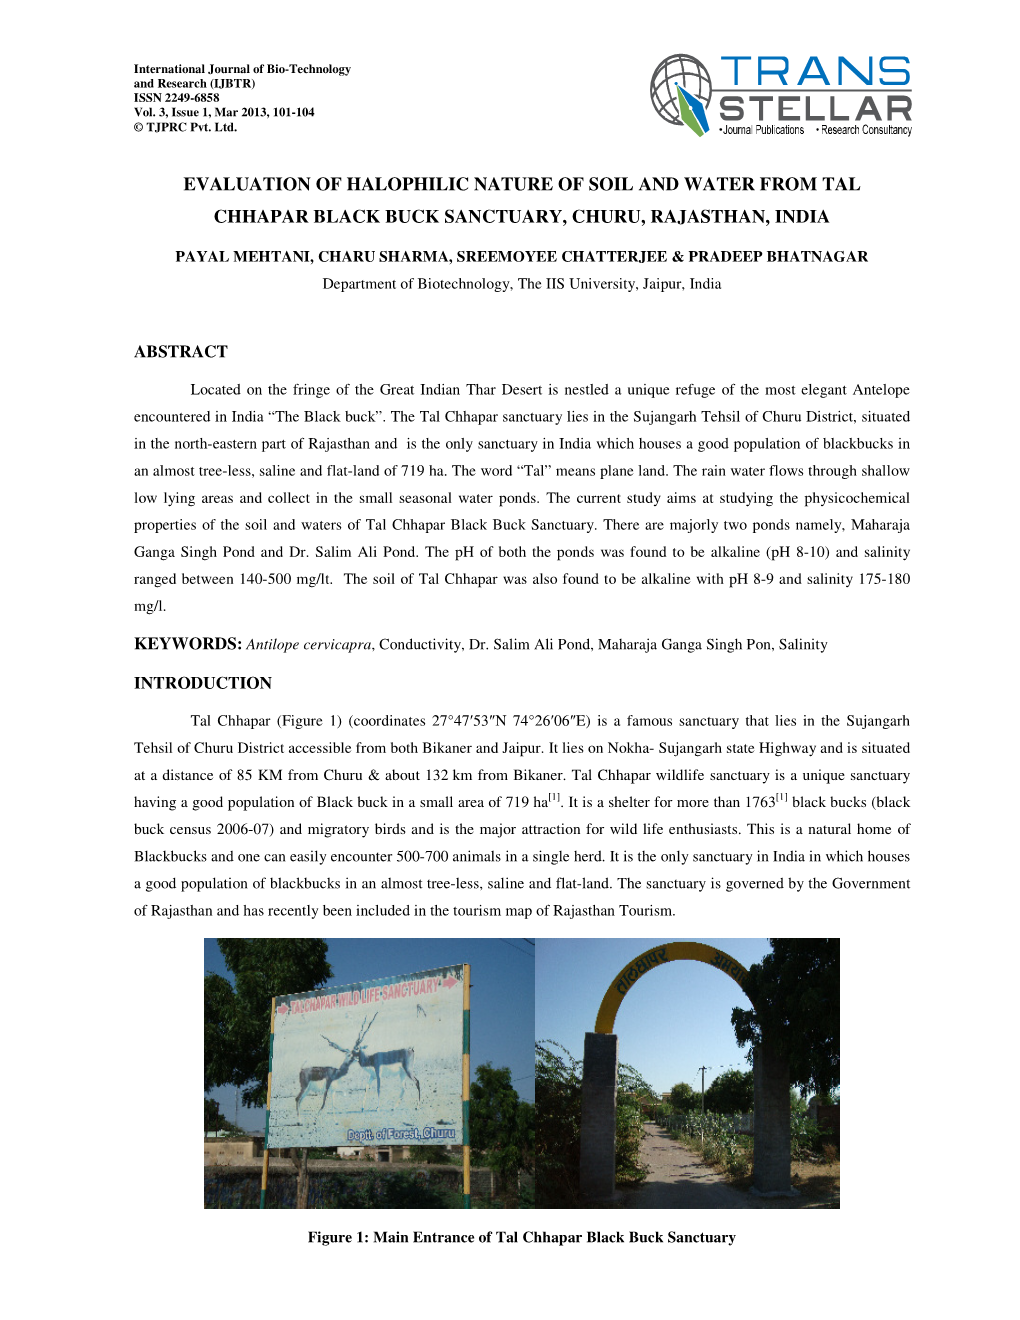 Evaluation of Halophilic Nature of Soil and Water from Tal Chhapar Black Buck Sanctuary, Churu, Rajasthan, India